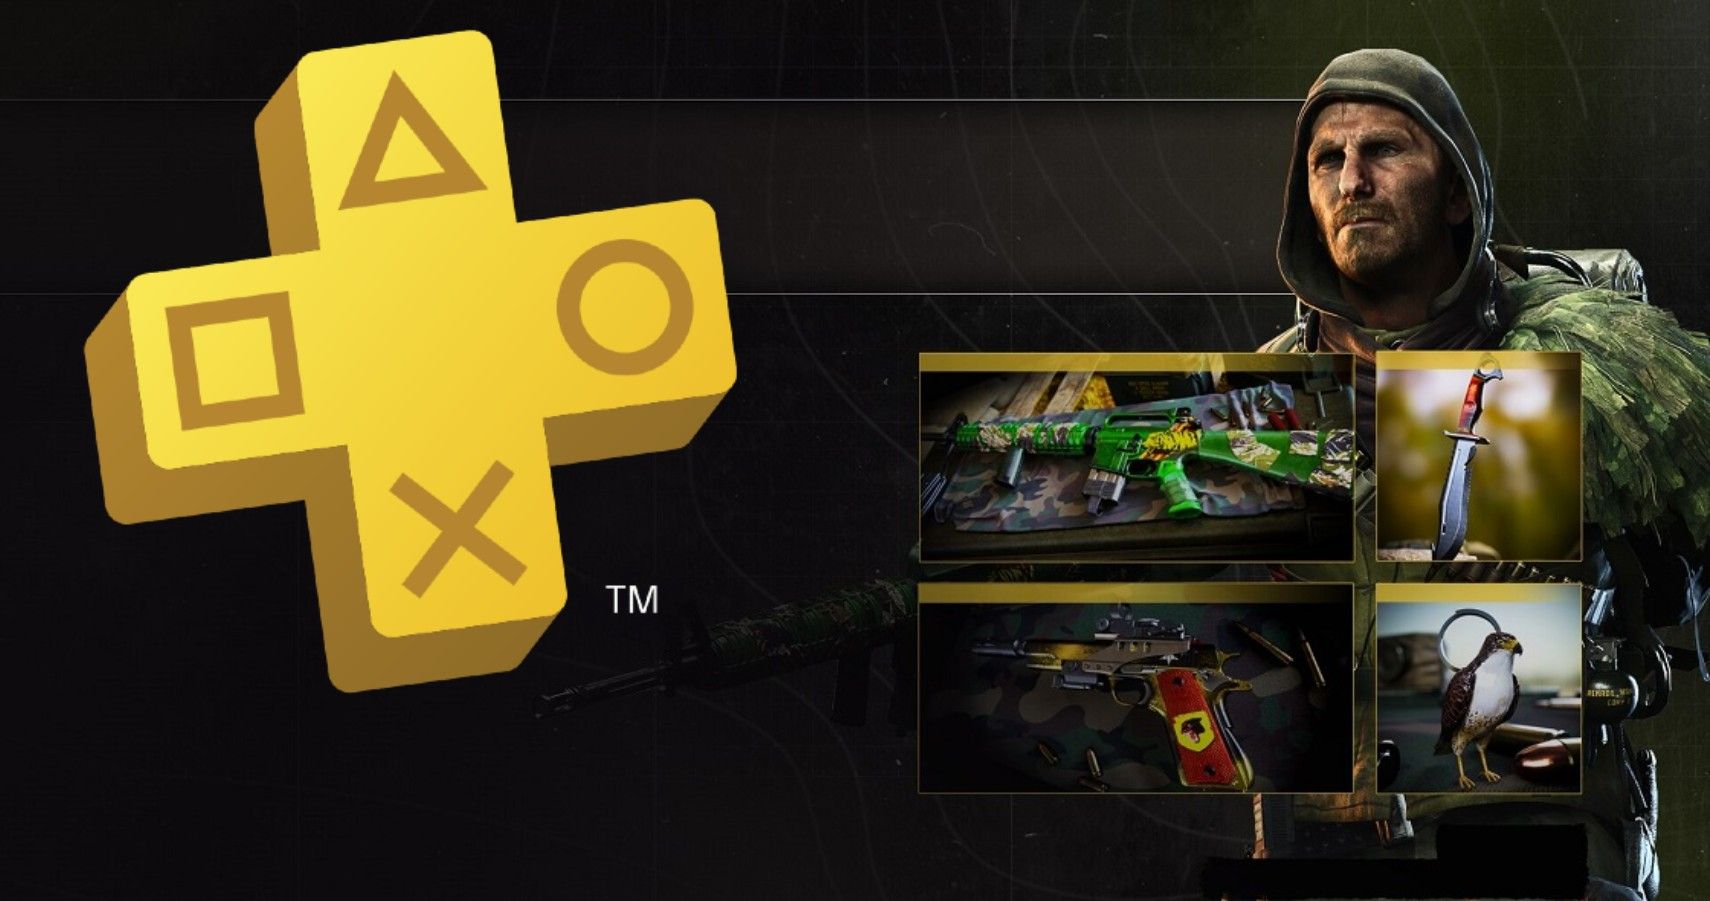 PlayStation Plus subscribers get this cool skin pack in Warzone